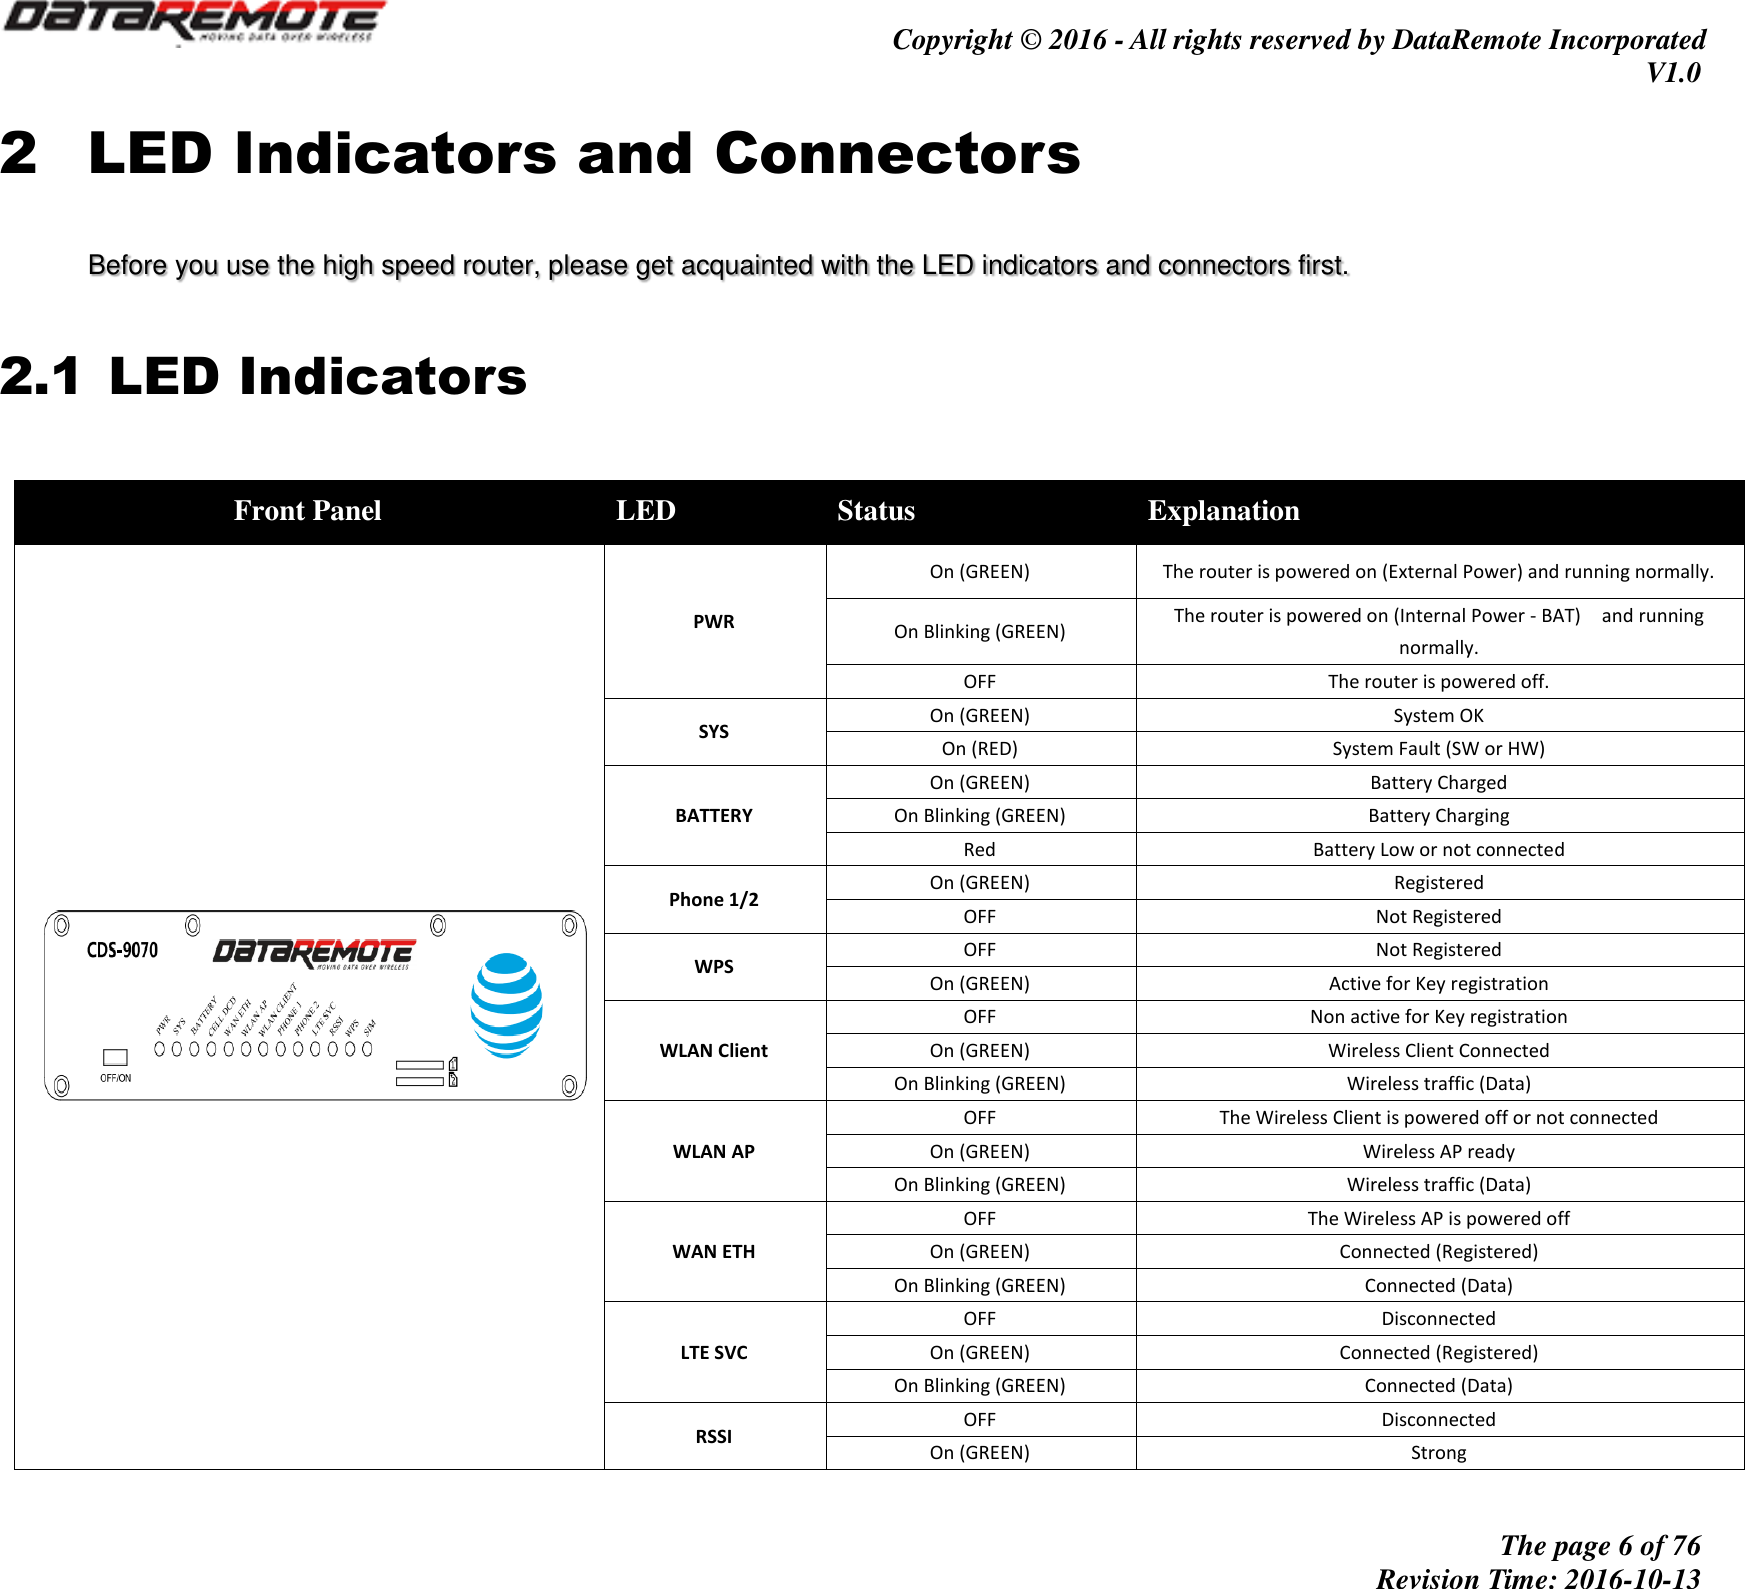                                         Copyright © 2016 - All rights reserved by DataRemote Incorporated V1.0                                                          The page 6 of 76 Revision Time: 2016-10-13     2 LED Indicators and Connectors Before you use the high speed router, please get acquainted with the LED indicators and connectors first. 2.1 LED Indicators Front Panel LED Status Explanation  PWR On (GREEN) The router is powered on (External Power) and running normally. On Blinking (GREEN) The router is powered on (Internal Power - BAT)    and running normally. OFF The router is powered off. SYS On (GREEN) System OK On (RED) System Fault (SW or HW) BATTERY On (GREEN) Battery Charged On Blinking (GREEN) Battery Charging Red Battery Low or not connected Phone 1/2 On (GREEN) Registered OFF Not Registered WPS OFF Not Registered On (GREEN) Active for Key registration WLAN Client OFF Non active for Key registration On (GREEN) Wireless Client Connected On Blinking (GREEN) Wireless traffic (Data) WLAN AP OFF The Wireless Client is powered off or not connected On (GREEN) Wireless AP ready On Blinking (GREEN) Wireless traffic (Data) WAN ETH OFF The Wireless AP is powered off On (GREEN) Connected (Registered) On Blinking (GREEN) Connected (Data) LTE SVC OFF Disconnected On (GREEN) Connected (Registered) On Blinking (GREEN) Connected (Data) RSSI OFF Disconnected On (GREEN) Strong 